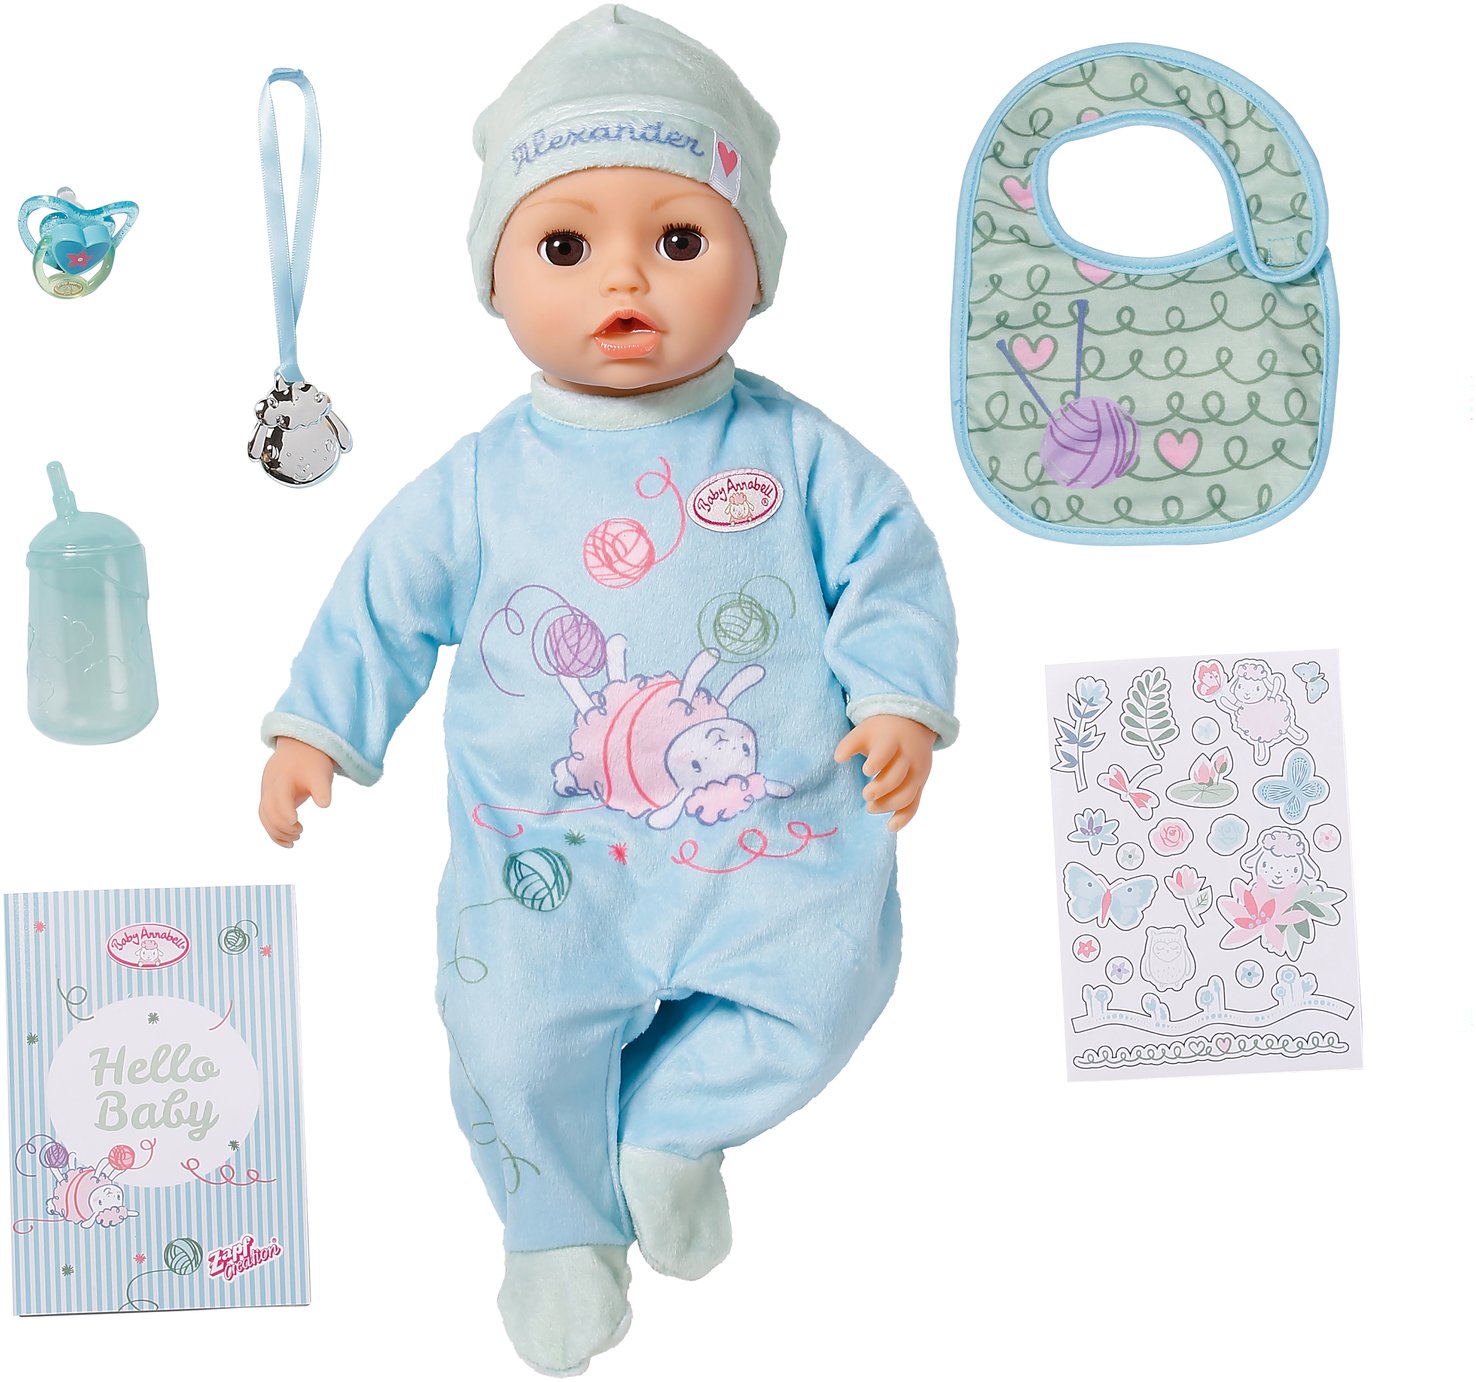 Baby Annabell Active Alexander Doll - 17inch/43cm